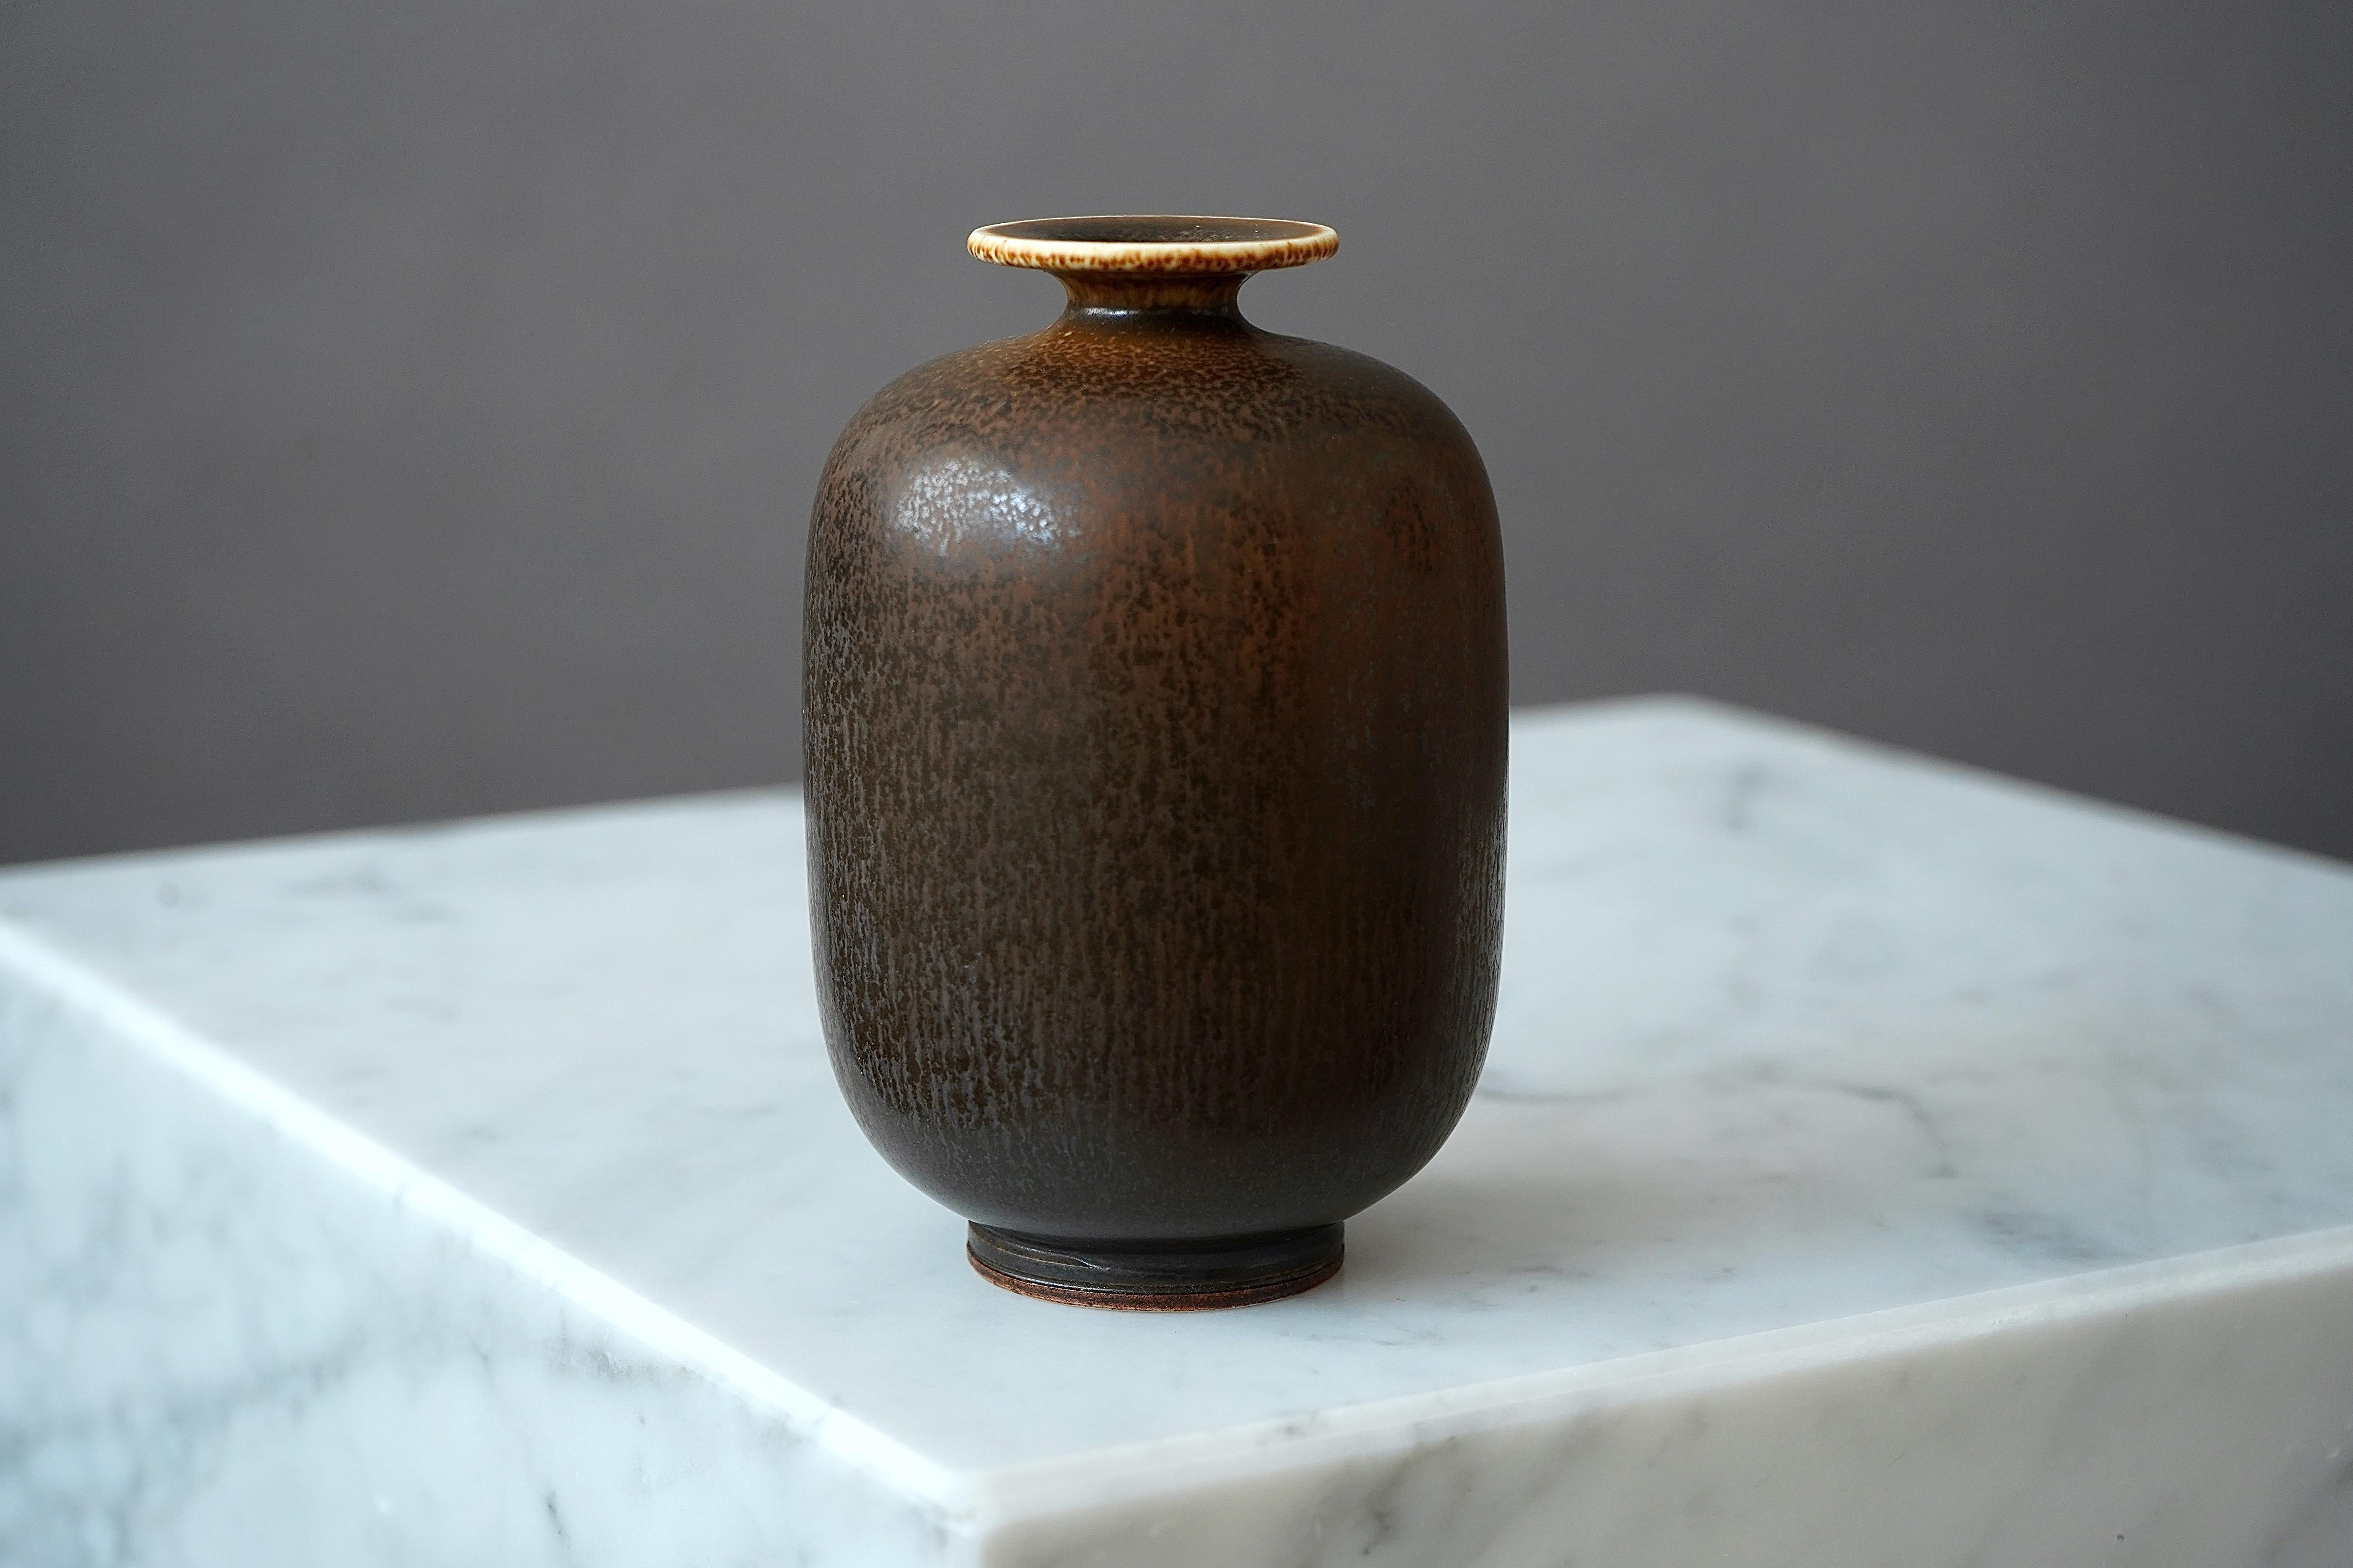 A beautiful stoneware vase with amazing hare’s fur glaze.
Made by master thrower Berndt Friberg, in the artist's studio at Gustavsberg, Sweden.

Excellent condition. Incised signature 